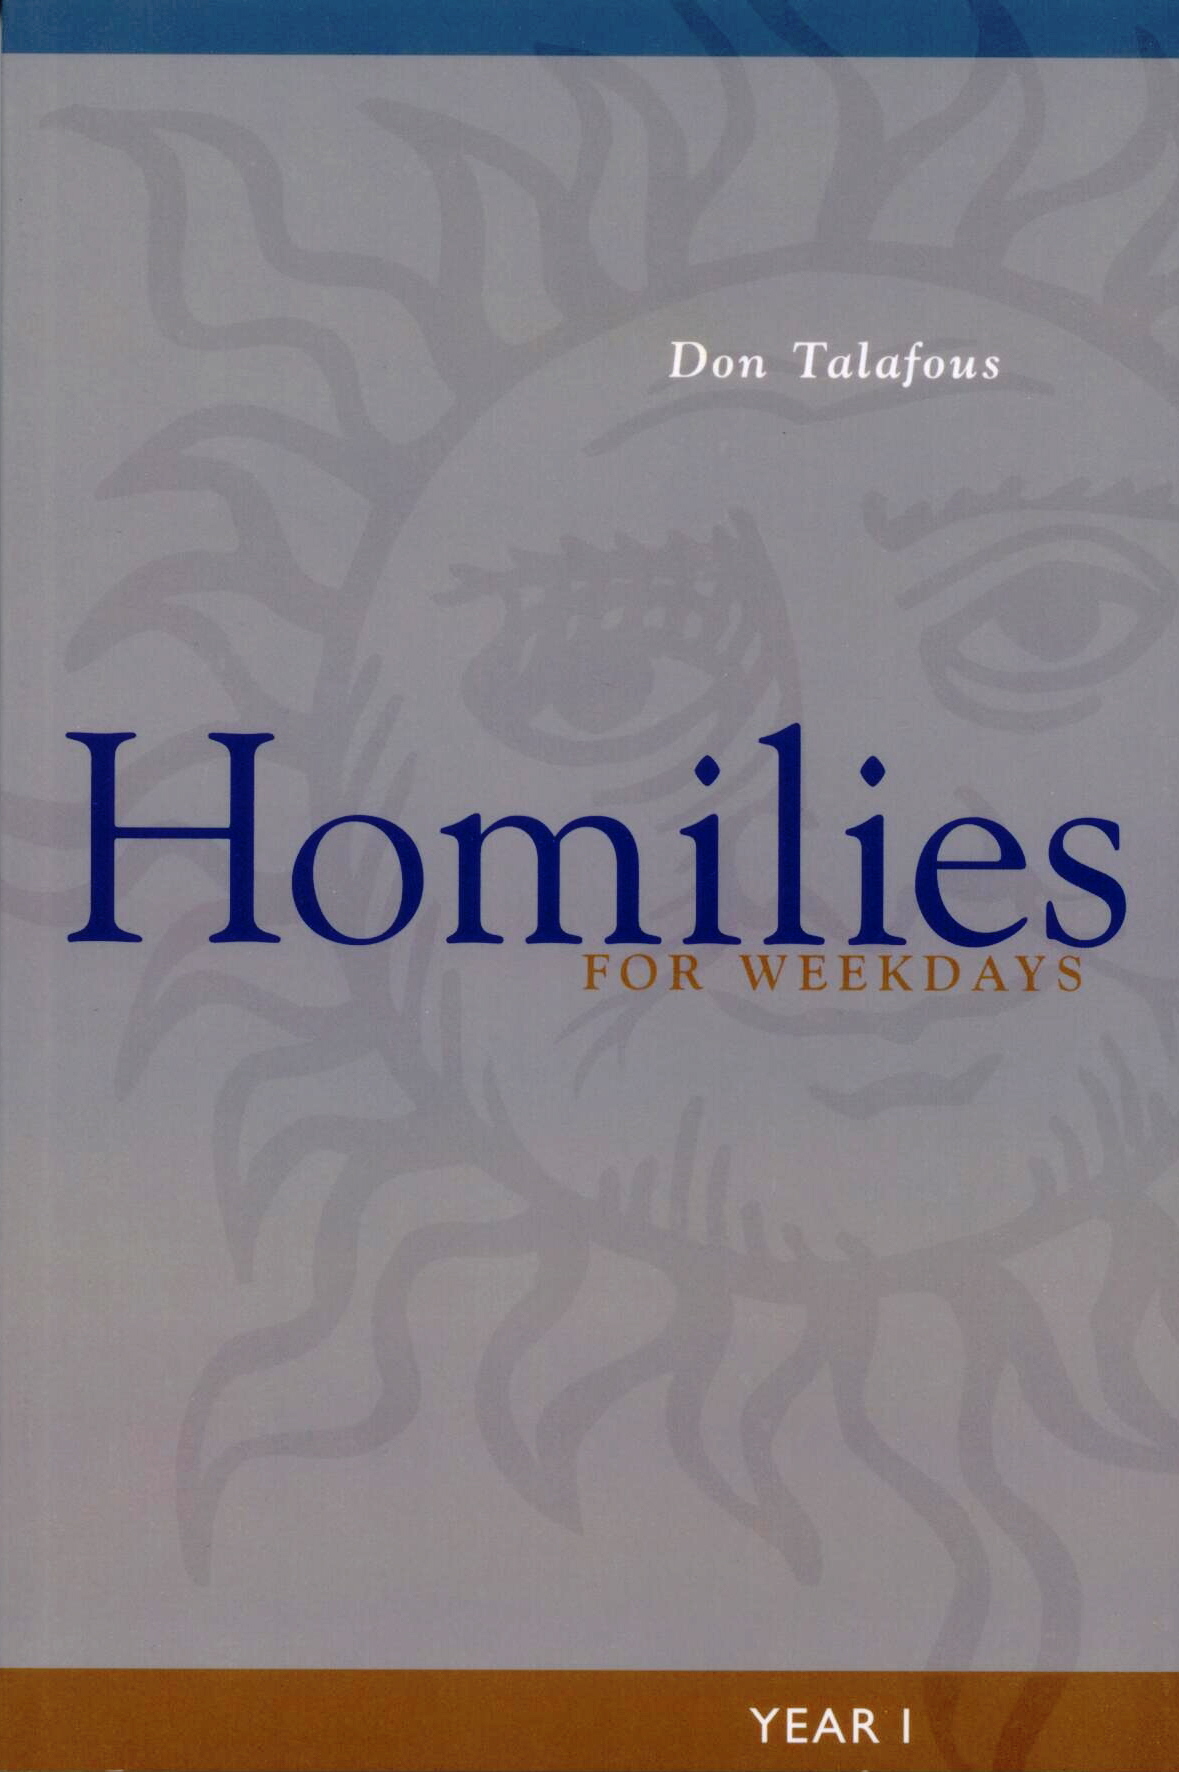 Homilies For Weekdays Year I, by Don Talafous #9780814630310